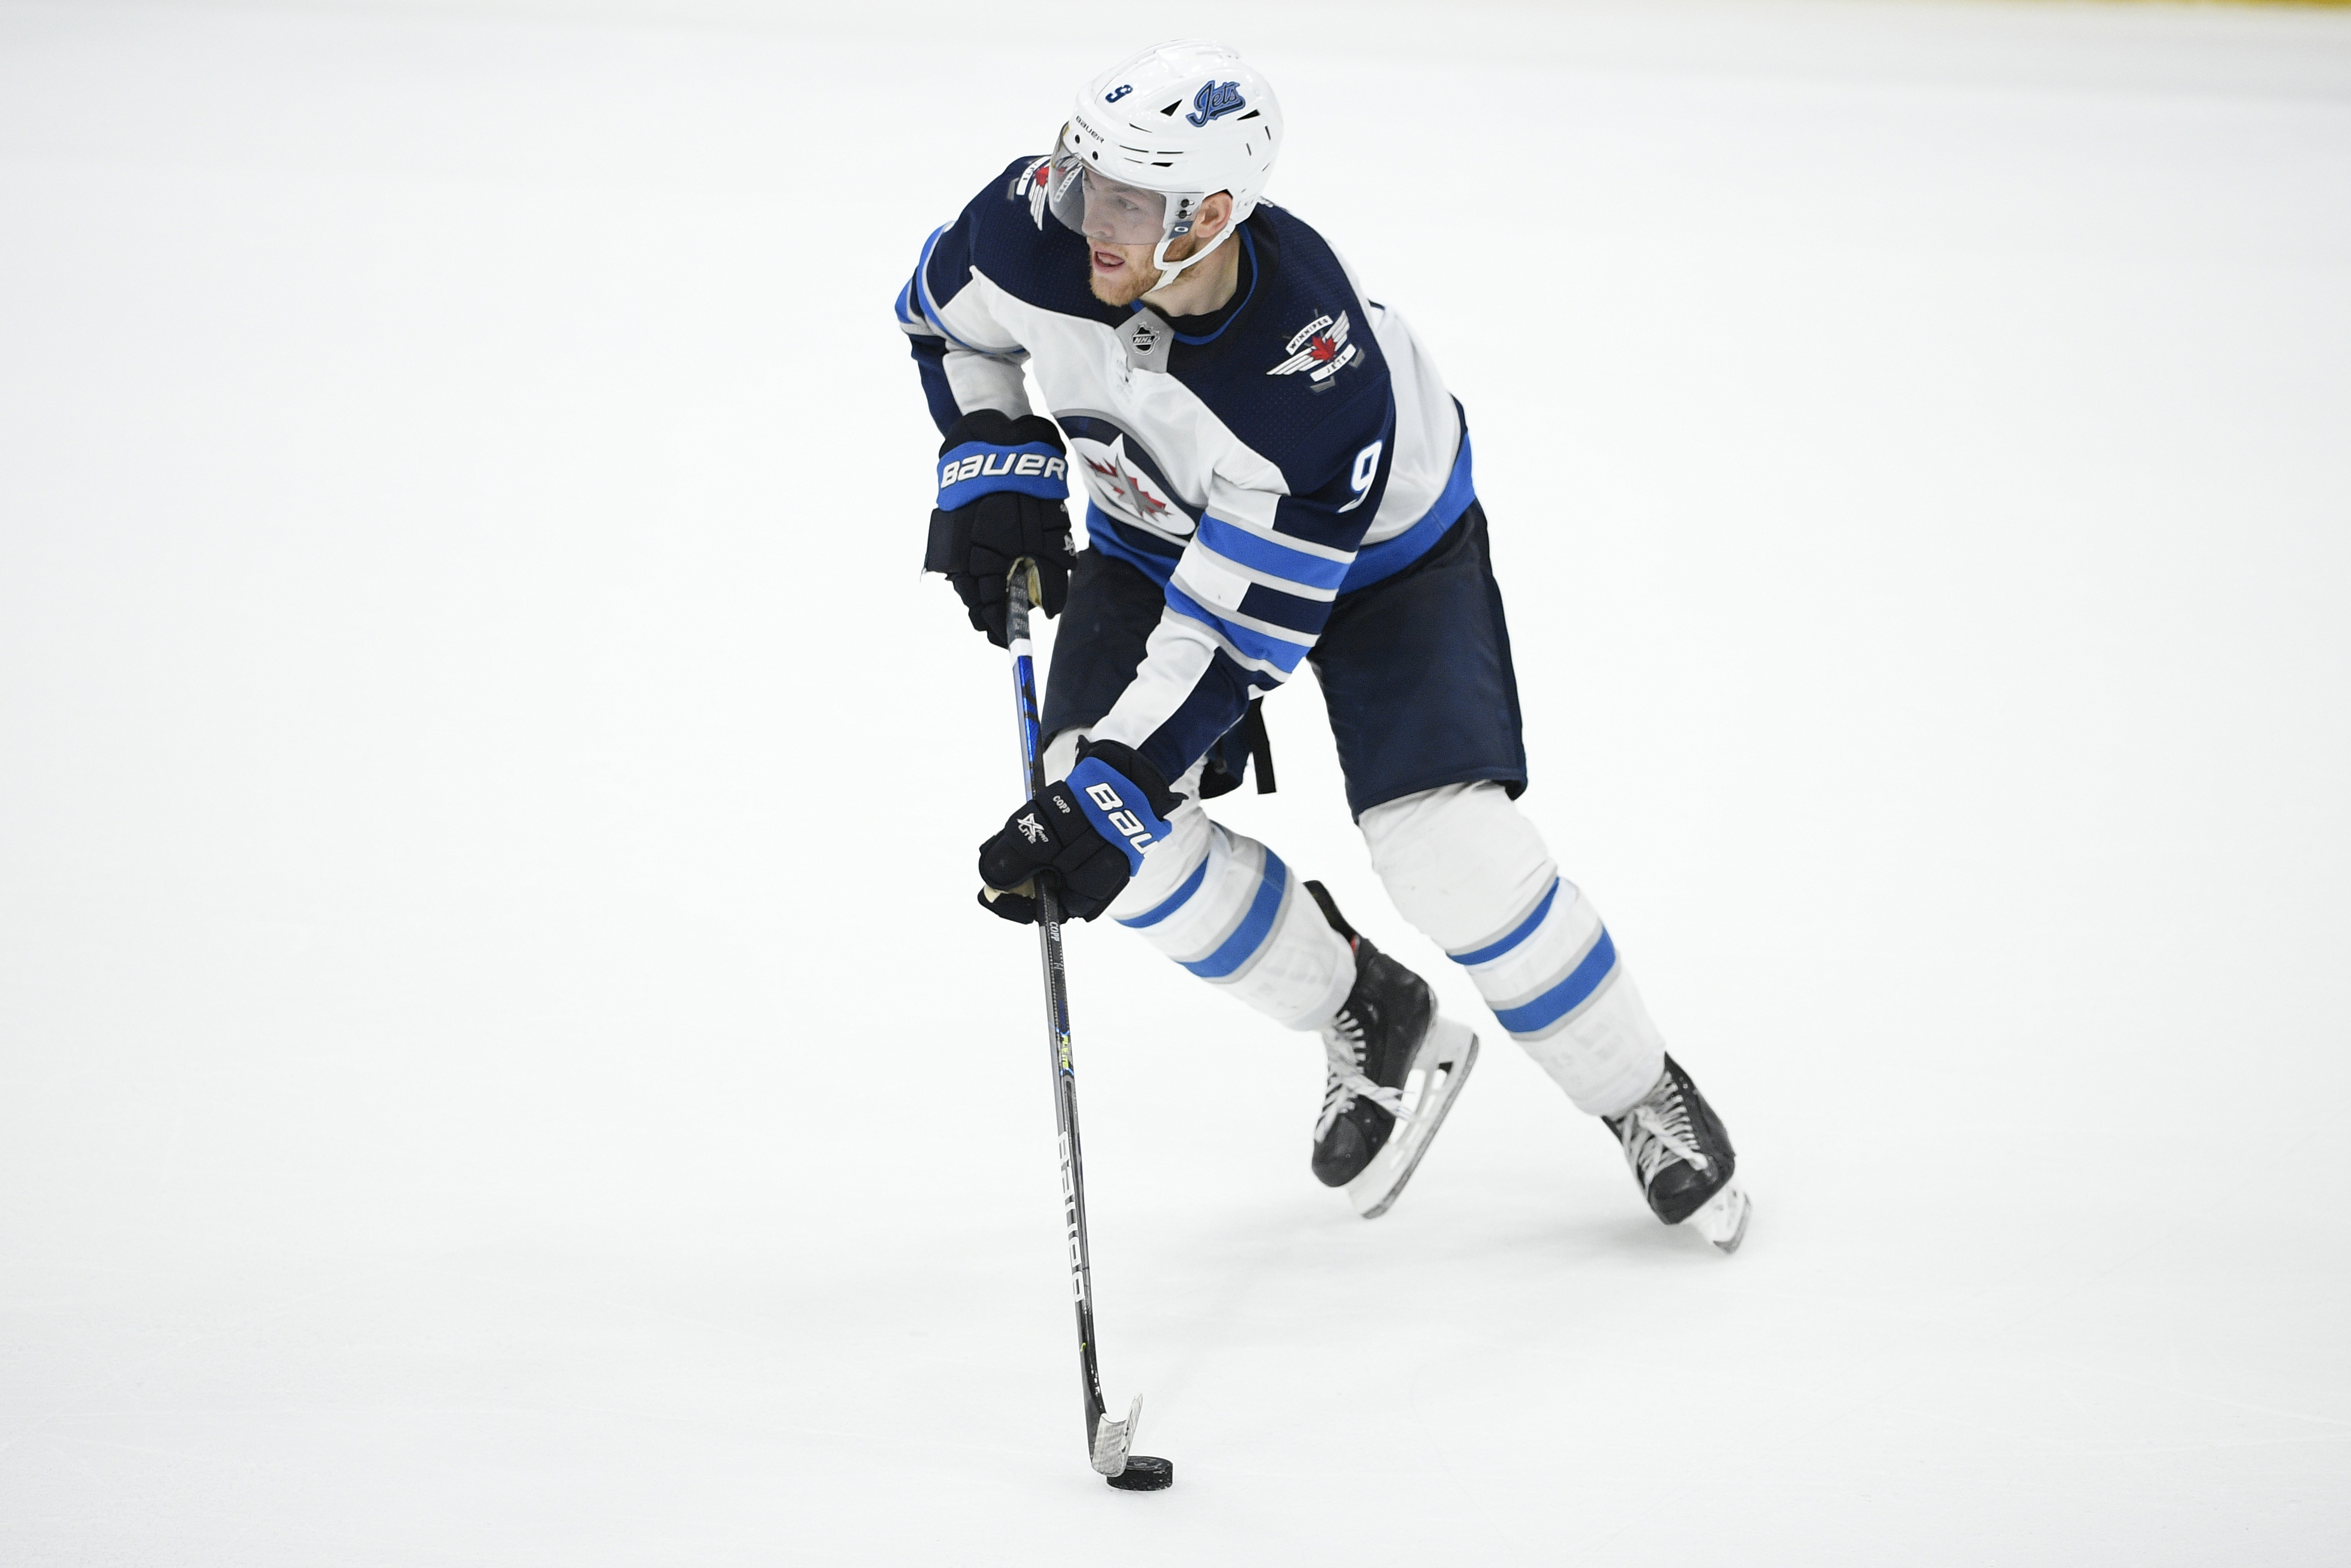 Winnipeg Jets Hockey Scores, Games, Players and Schedules